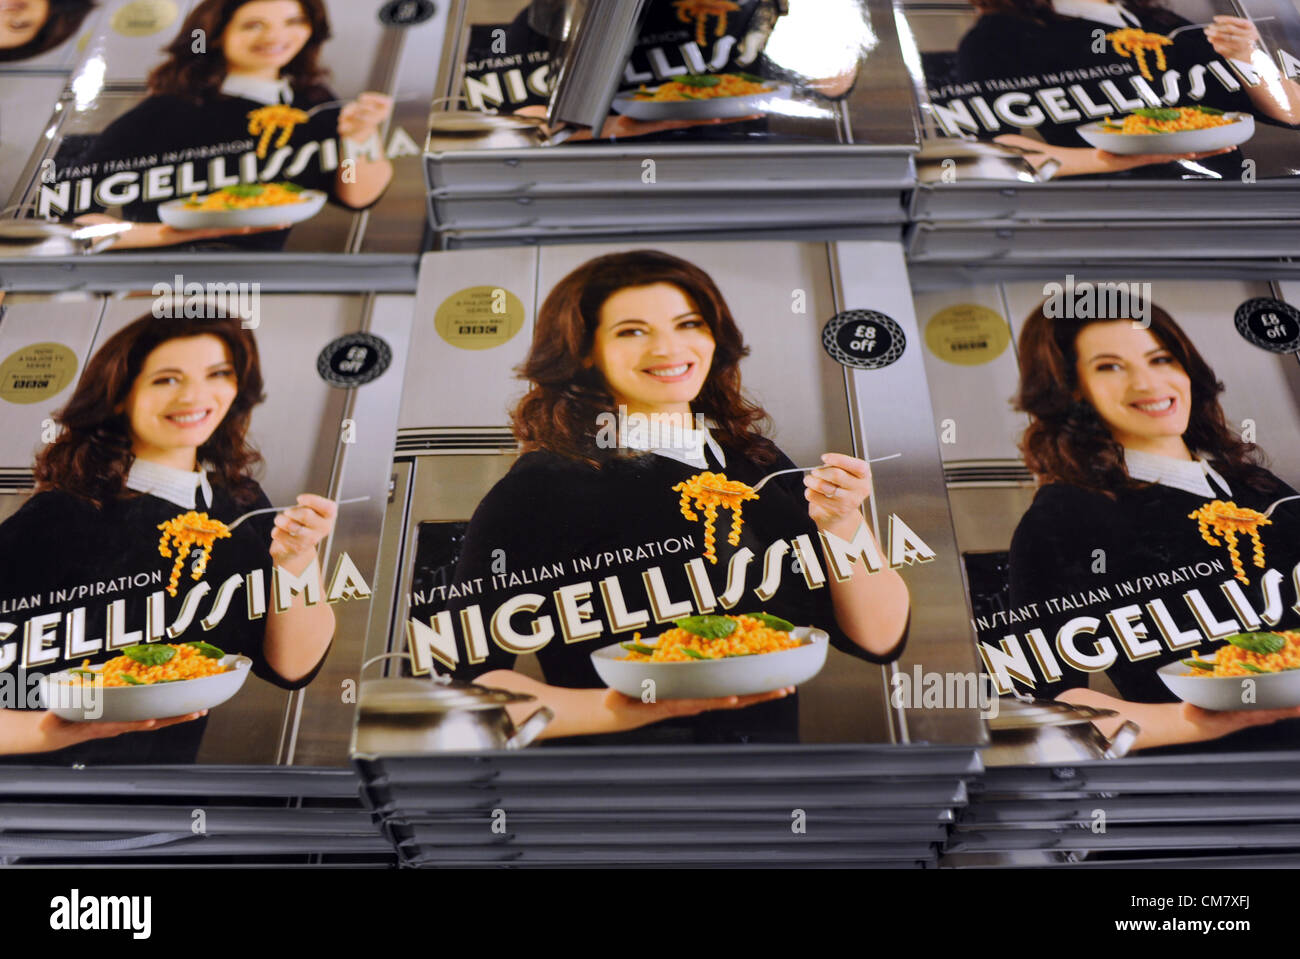 Brighton UK 24 October 2012 - Celebrity television cook Nigella Lawson was in Waterstones Brighton this evening signing copies of her new book 'Nigellissima' which is her take on Italian cookery Stock Photo